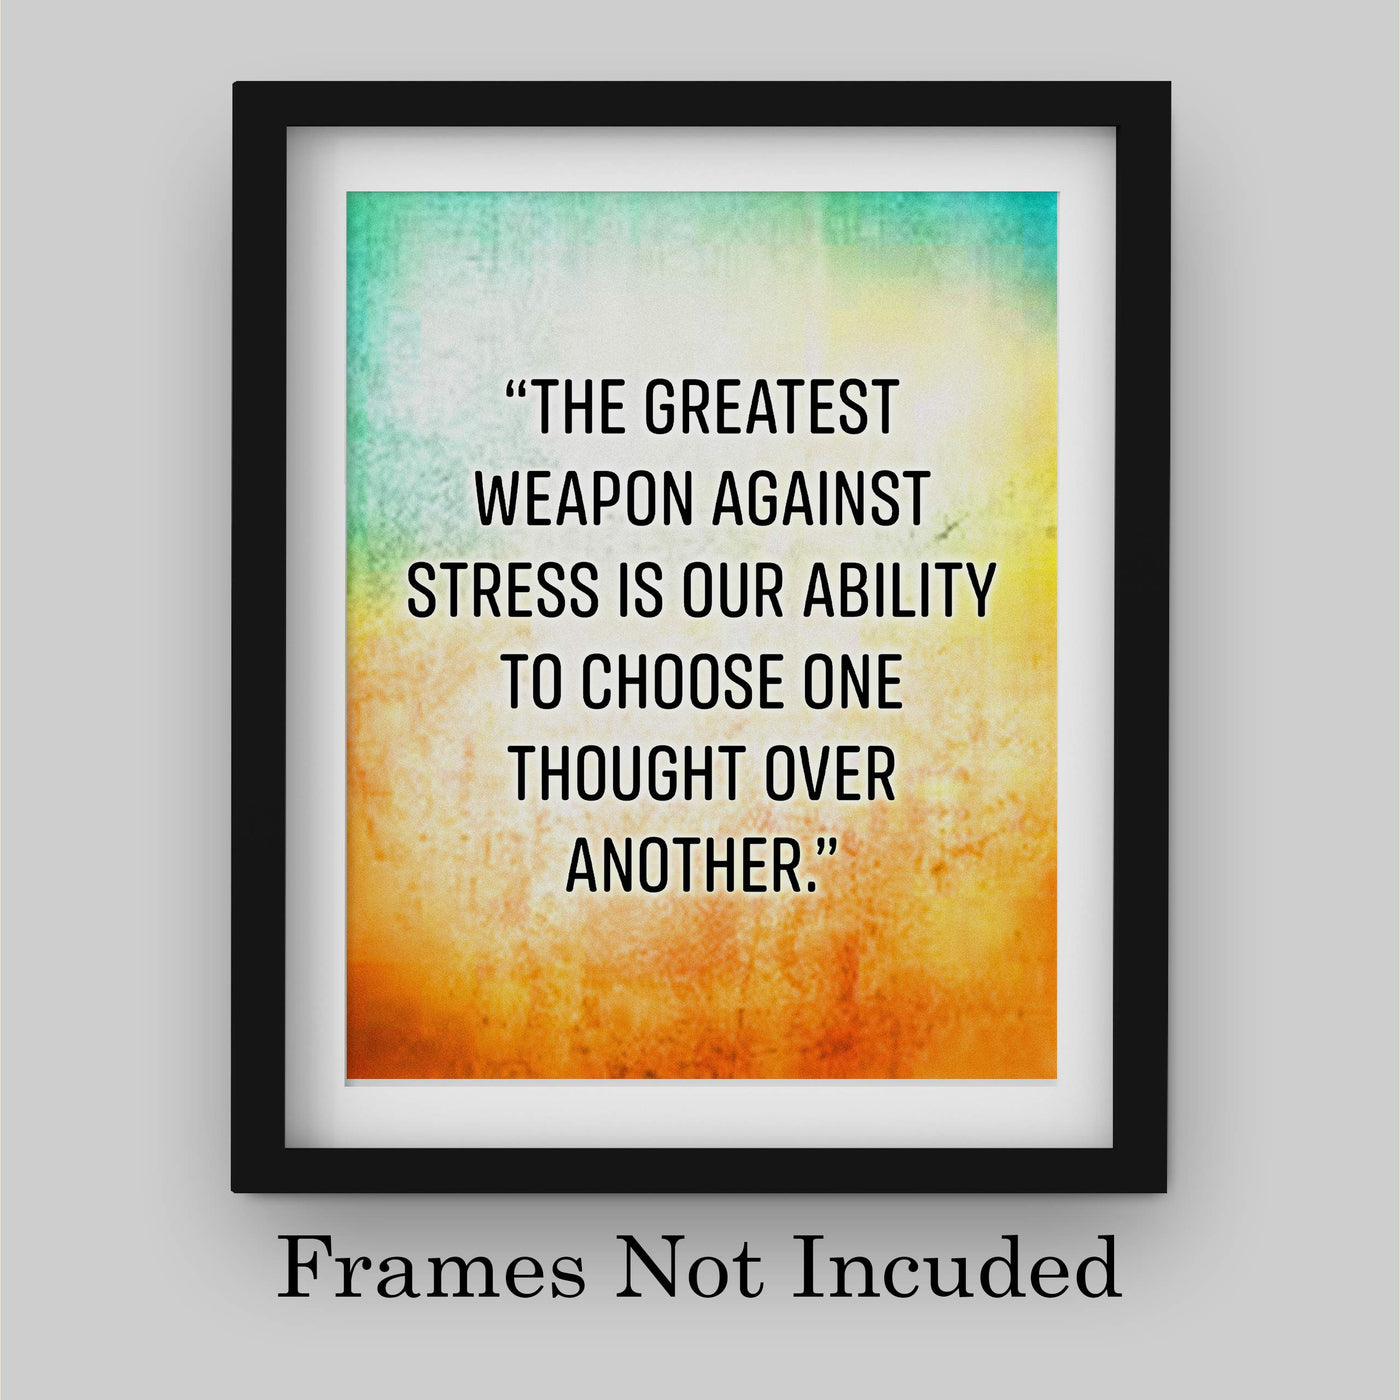 The Greatest Weapon Against Stress Motivational Quotes Wall Art -8 x 10" Modern Typographic Poster Print-Ready to Frame. Inspirational Home-Office-Classroom Decor. Choose Positive Thoughts!